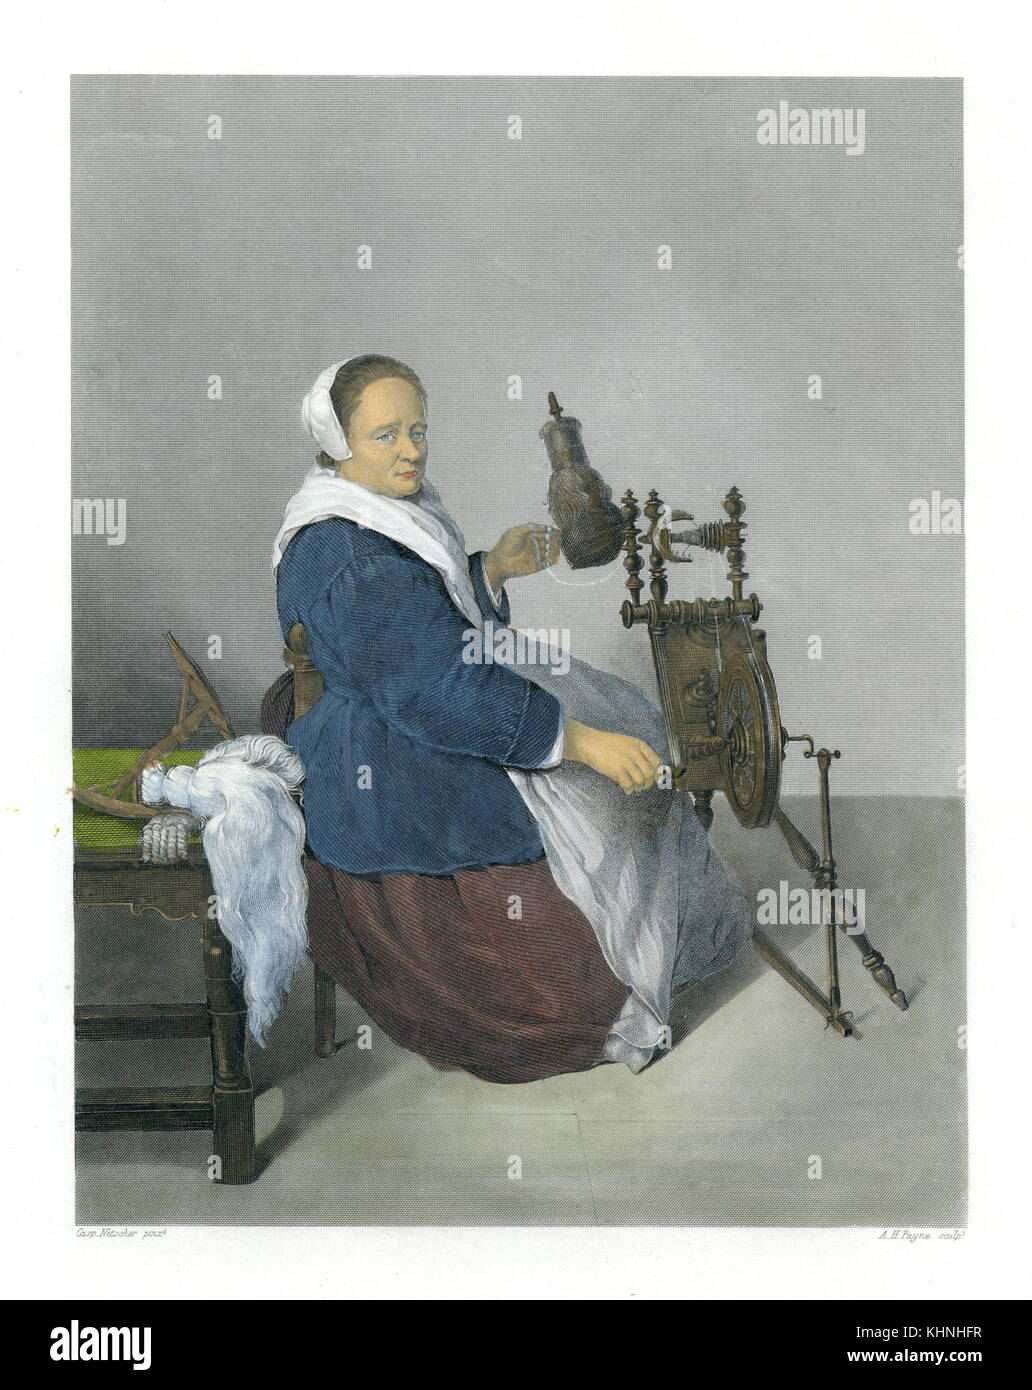 Wool Spinning Woman with Spinning Wheel (Spinnerin mit Spinnrad) Stock Photo